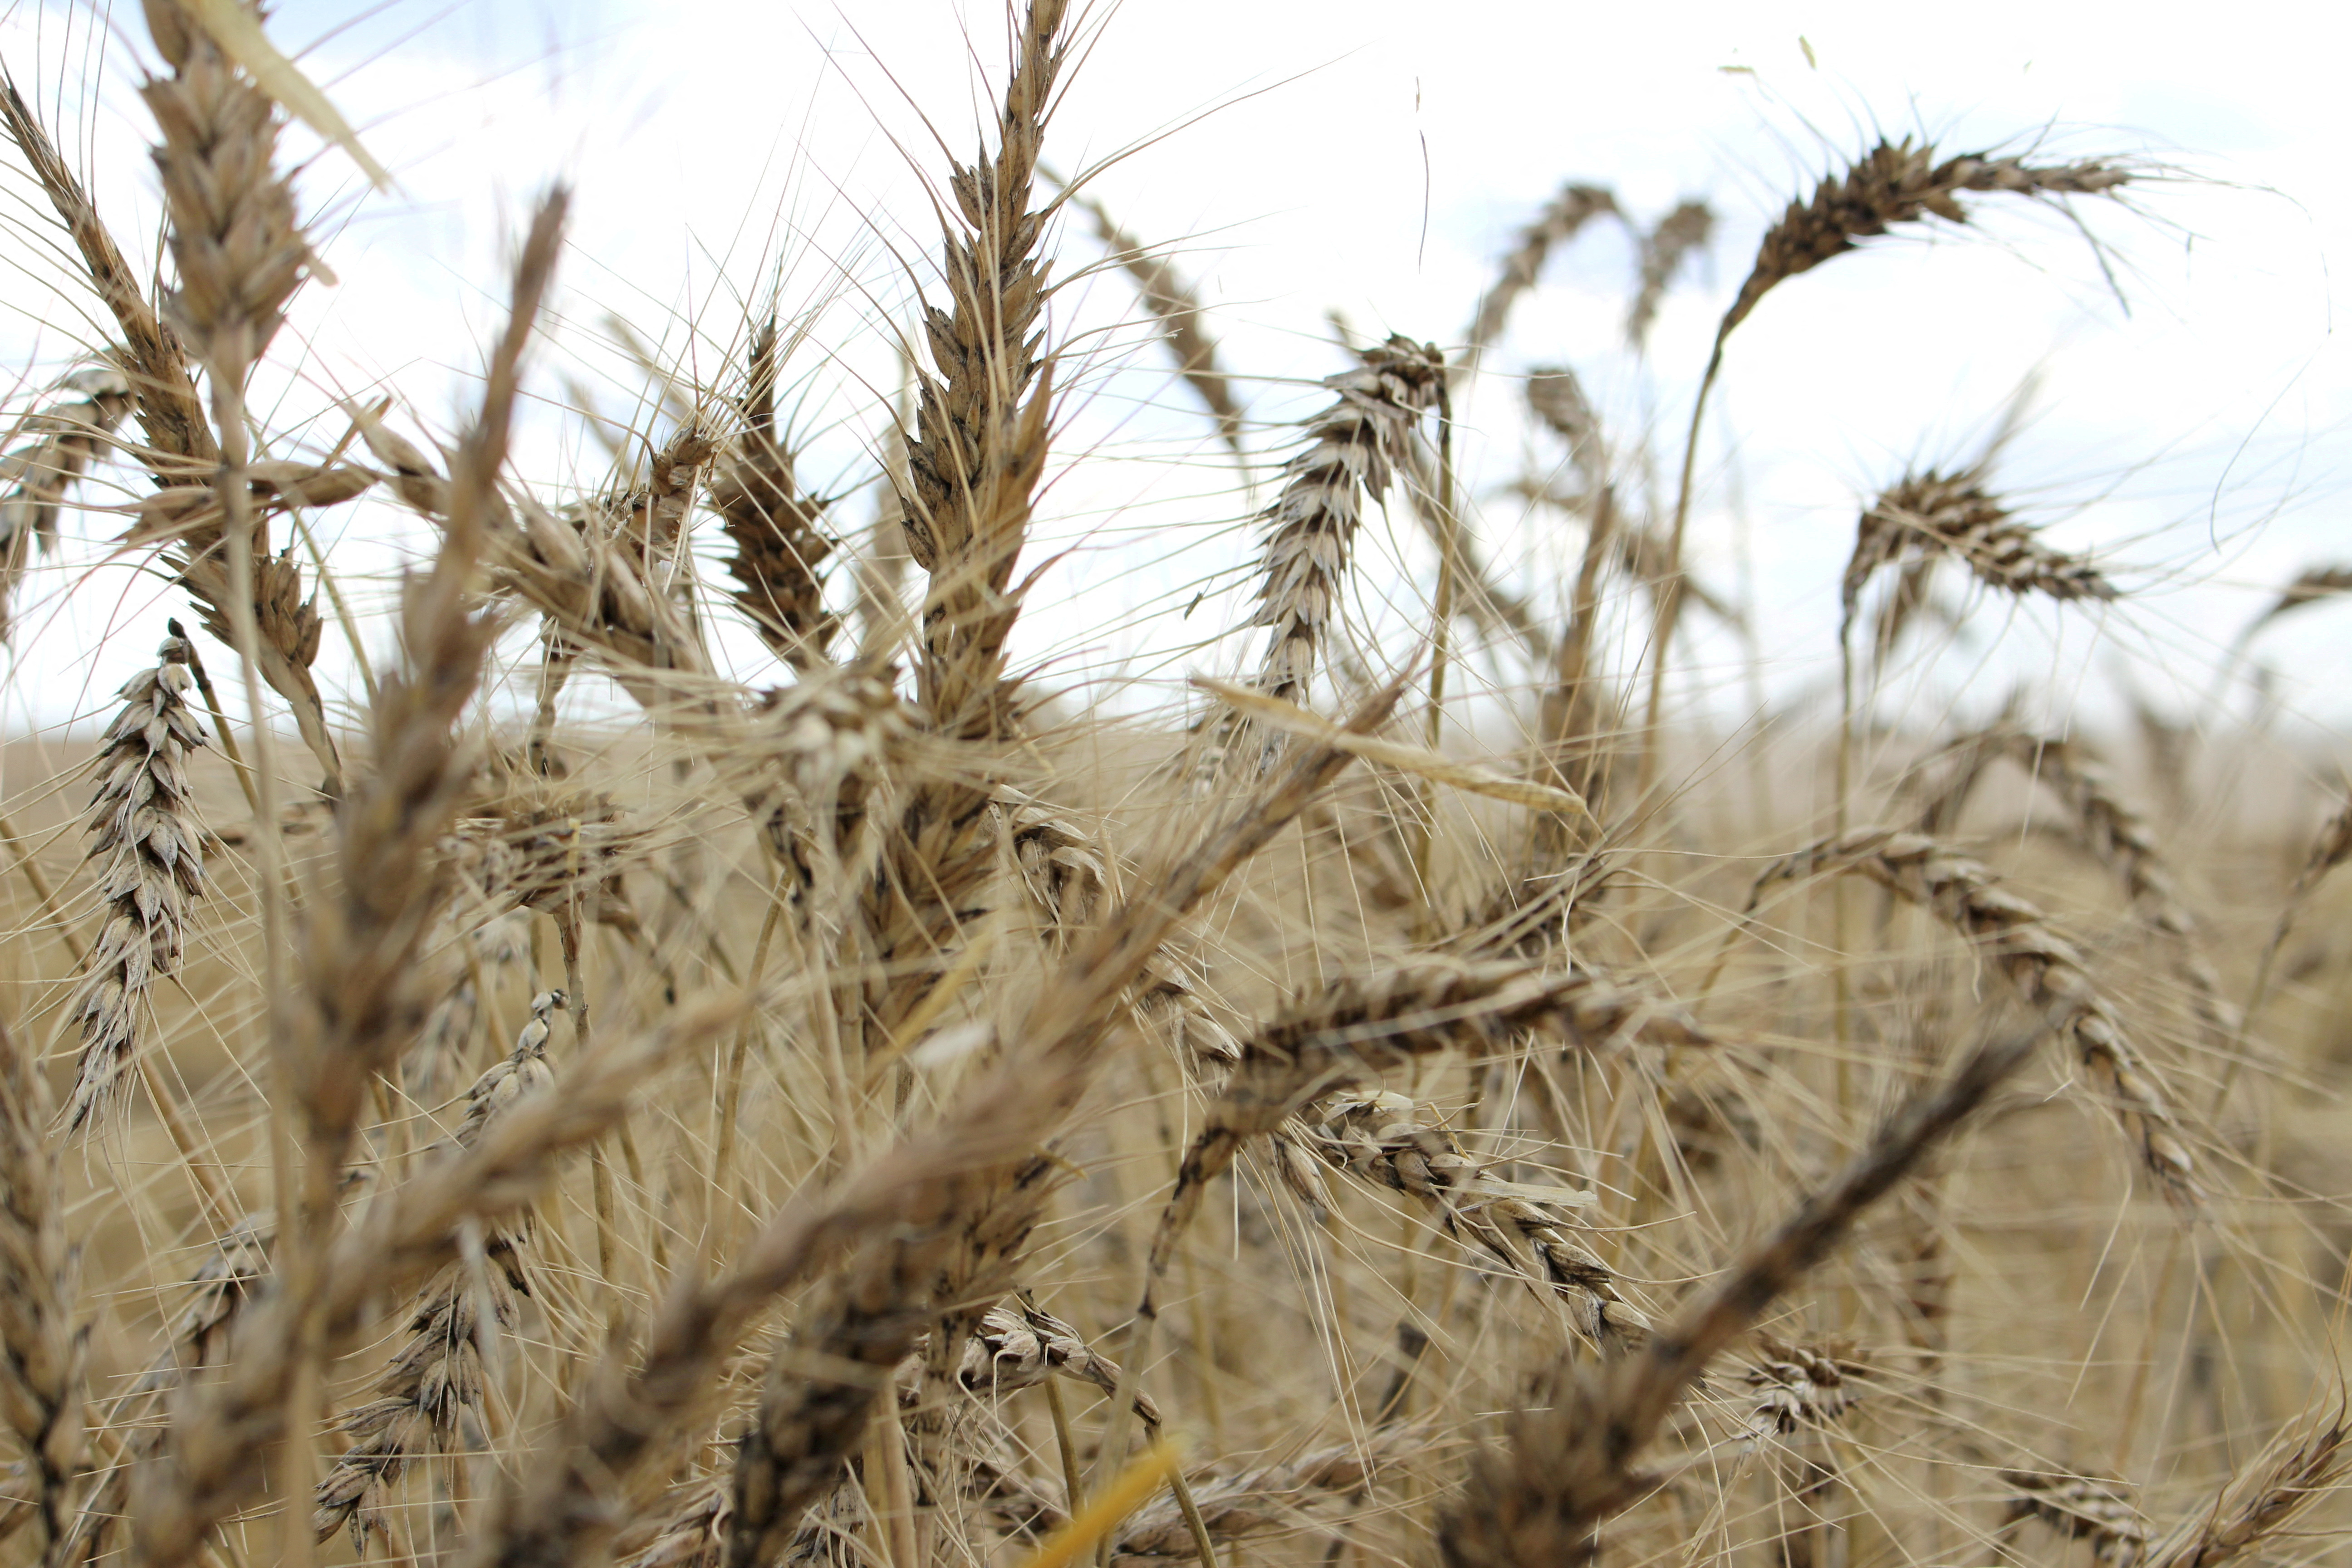 The crop is seen in a wheat field ahead of annual harvest near Moree